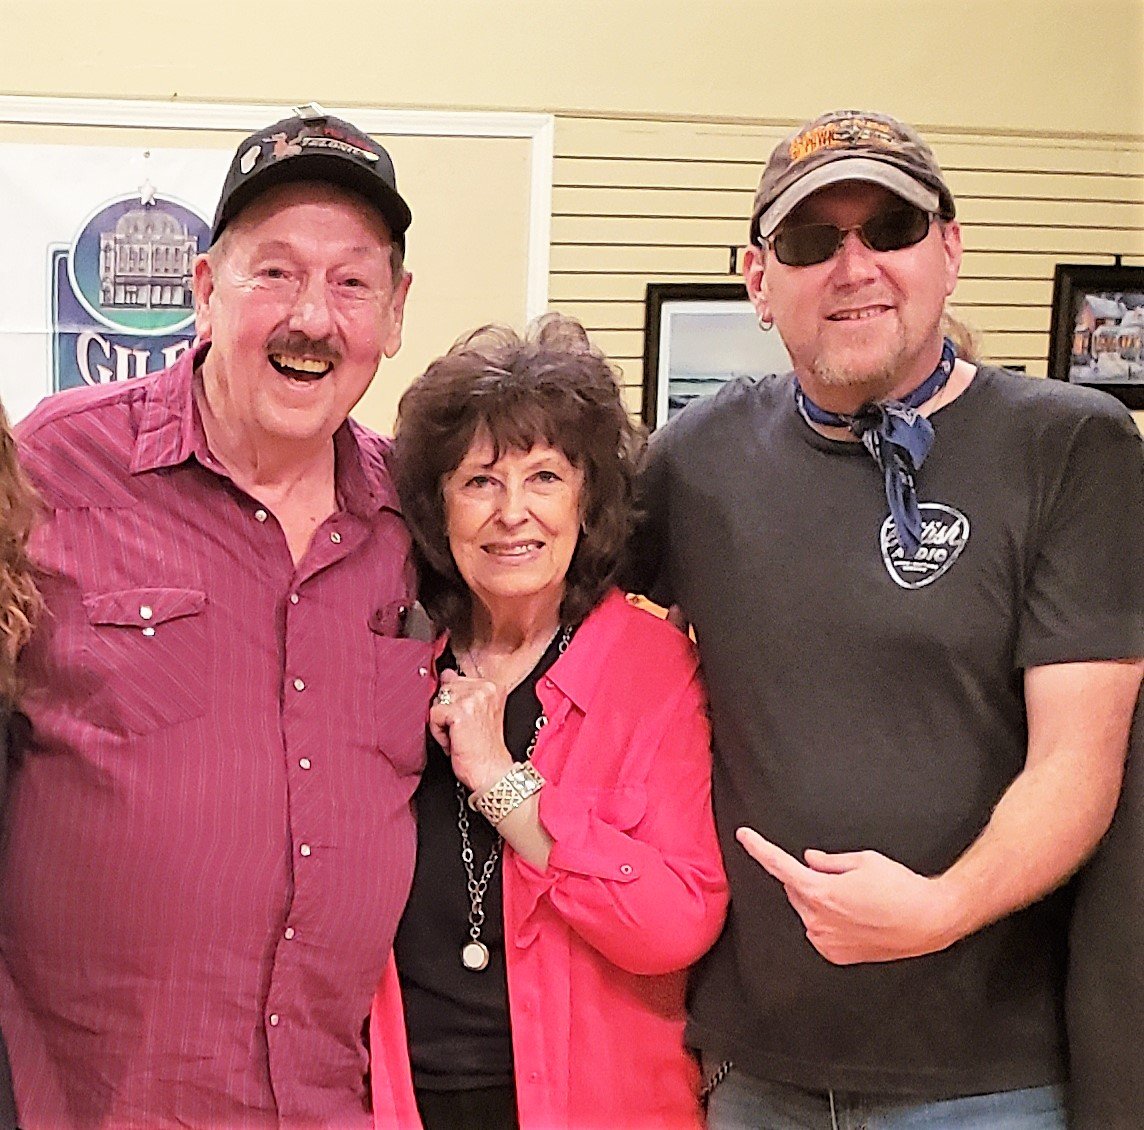 Backstage at a Show I played with Country Legends Leona Williams, Lynn Owsley (Troubadour Steel Great)